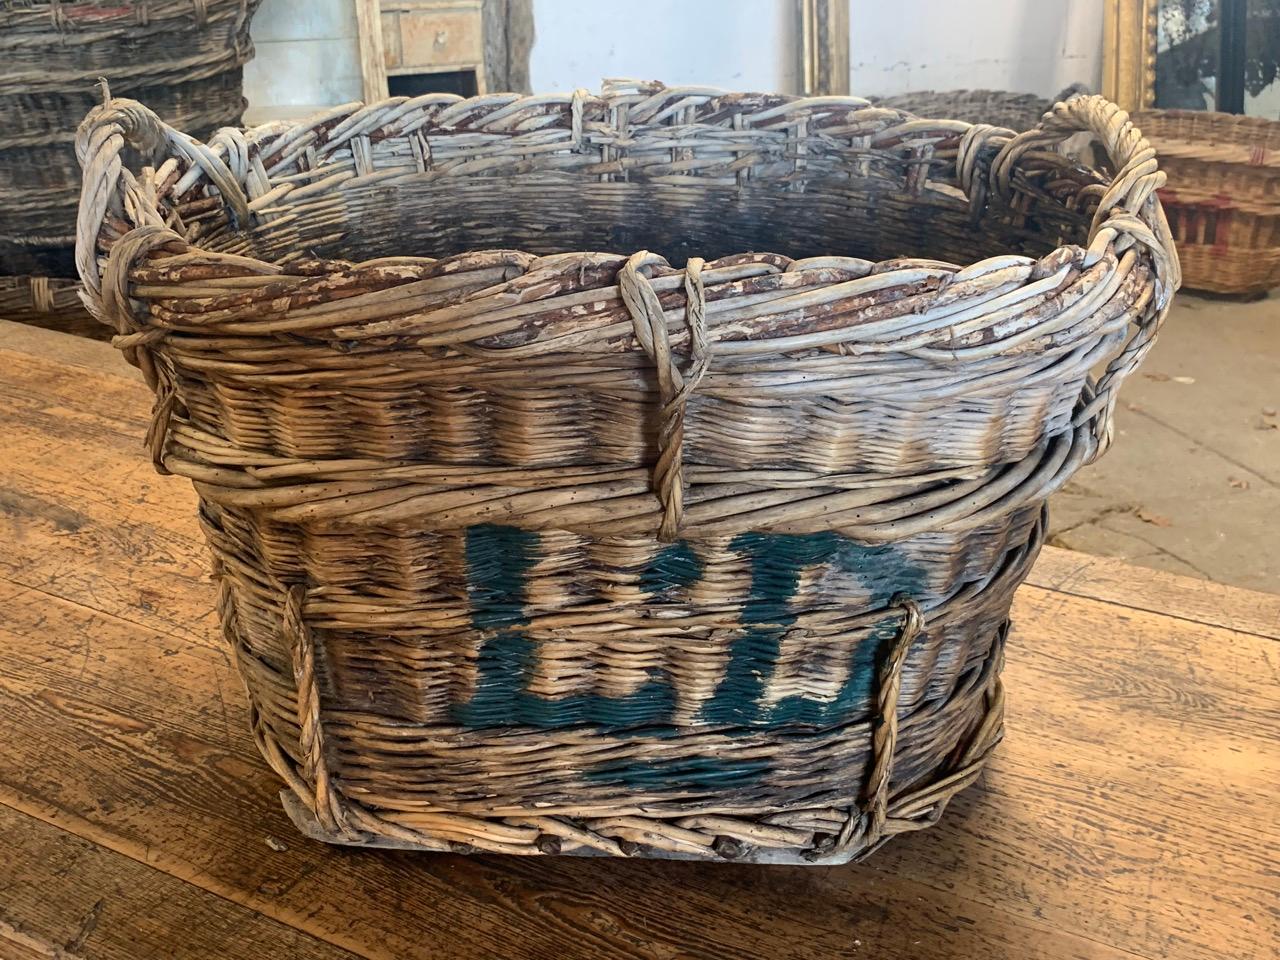 A nice early 20th century grape harvesting basket from the Champagne region of France. These were used in the vineyards to harvest the grapes and have the painted markings of the vineyard owner. circa 1900.
 